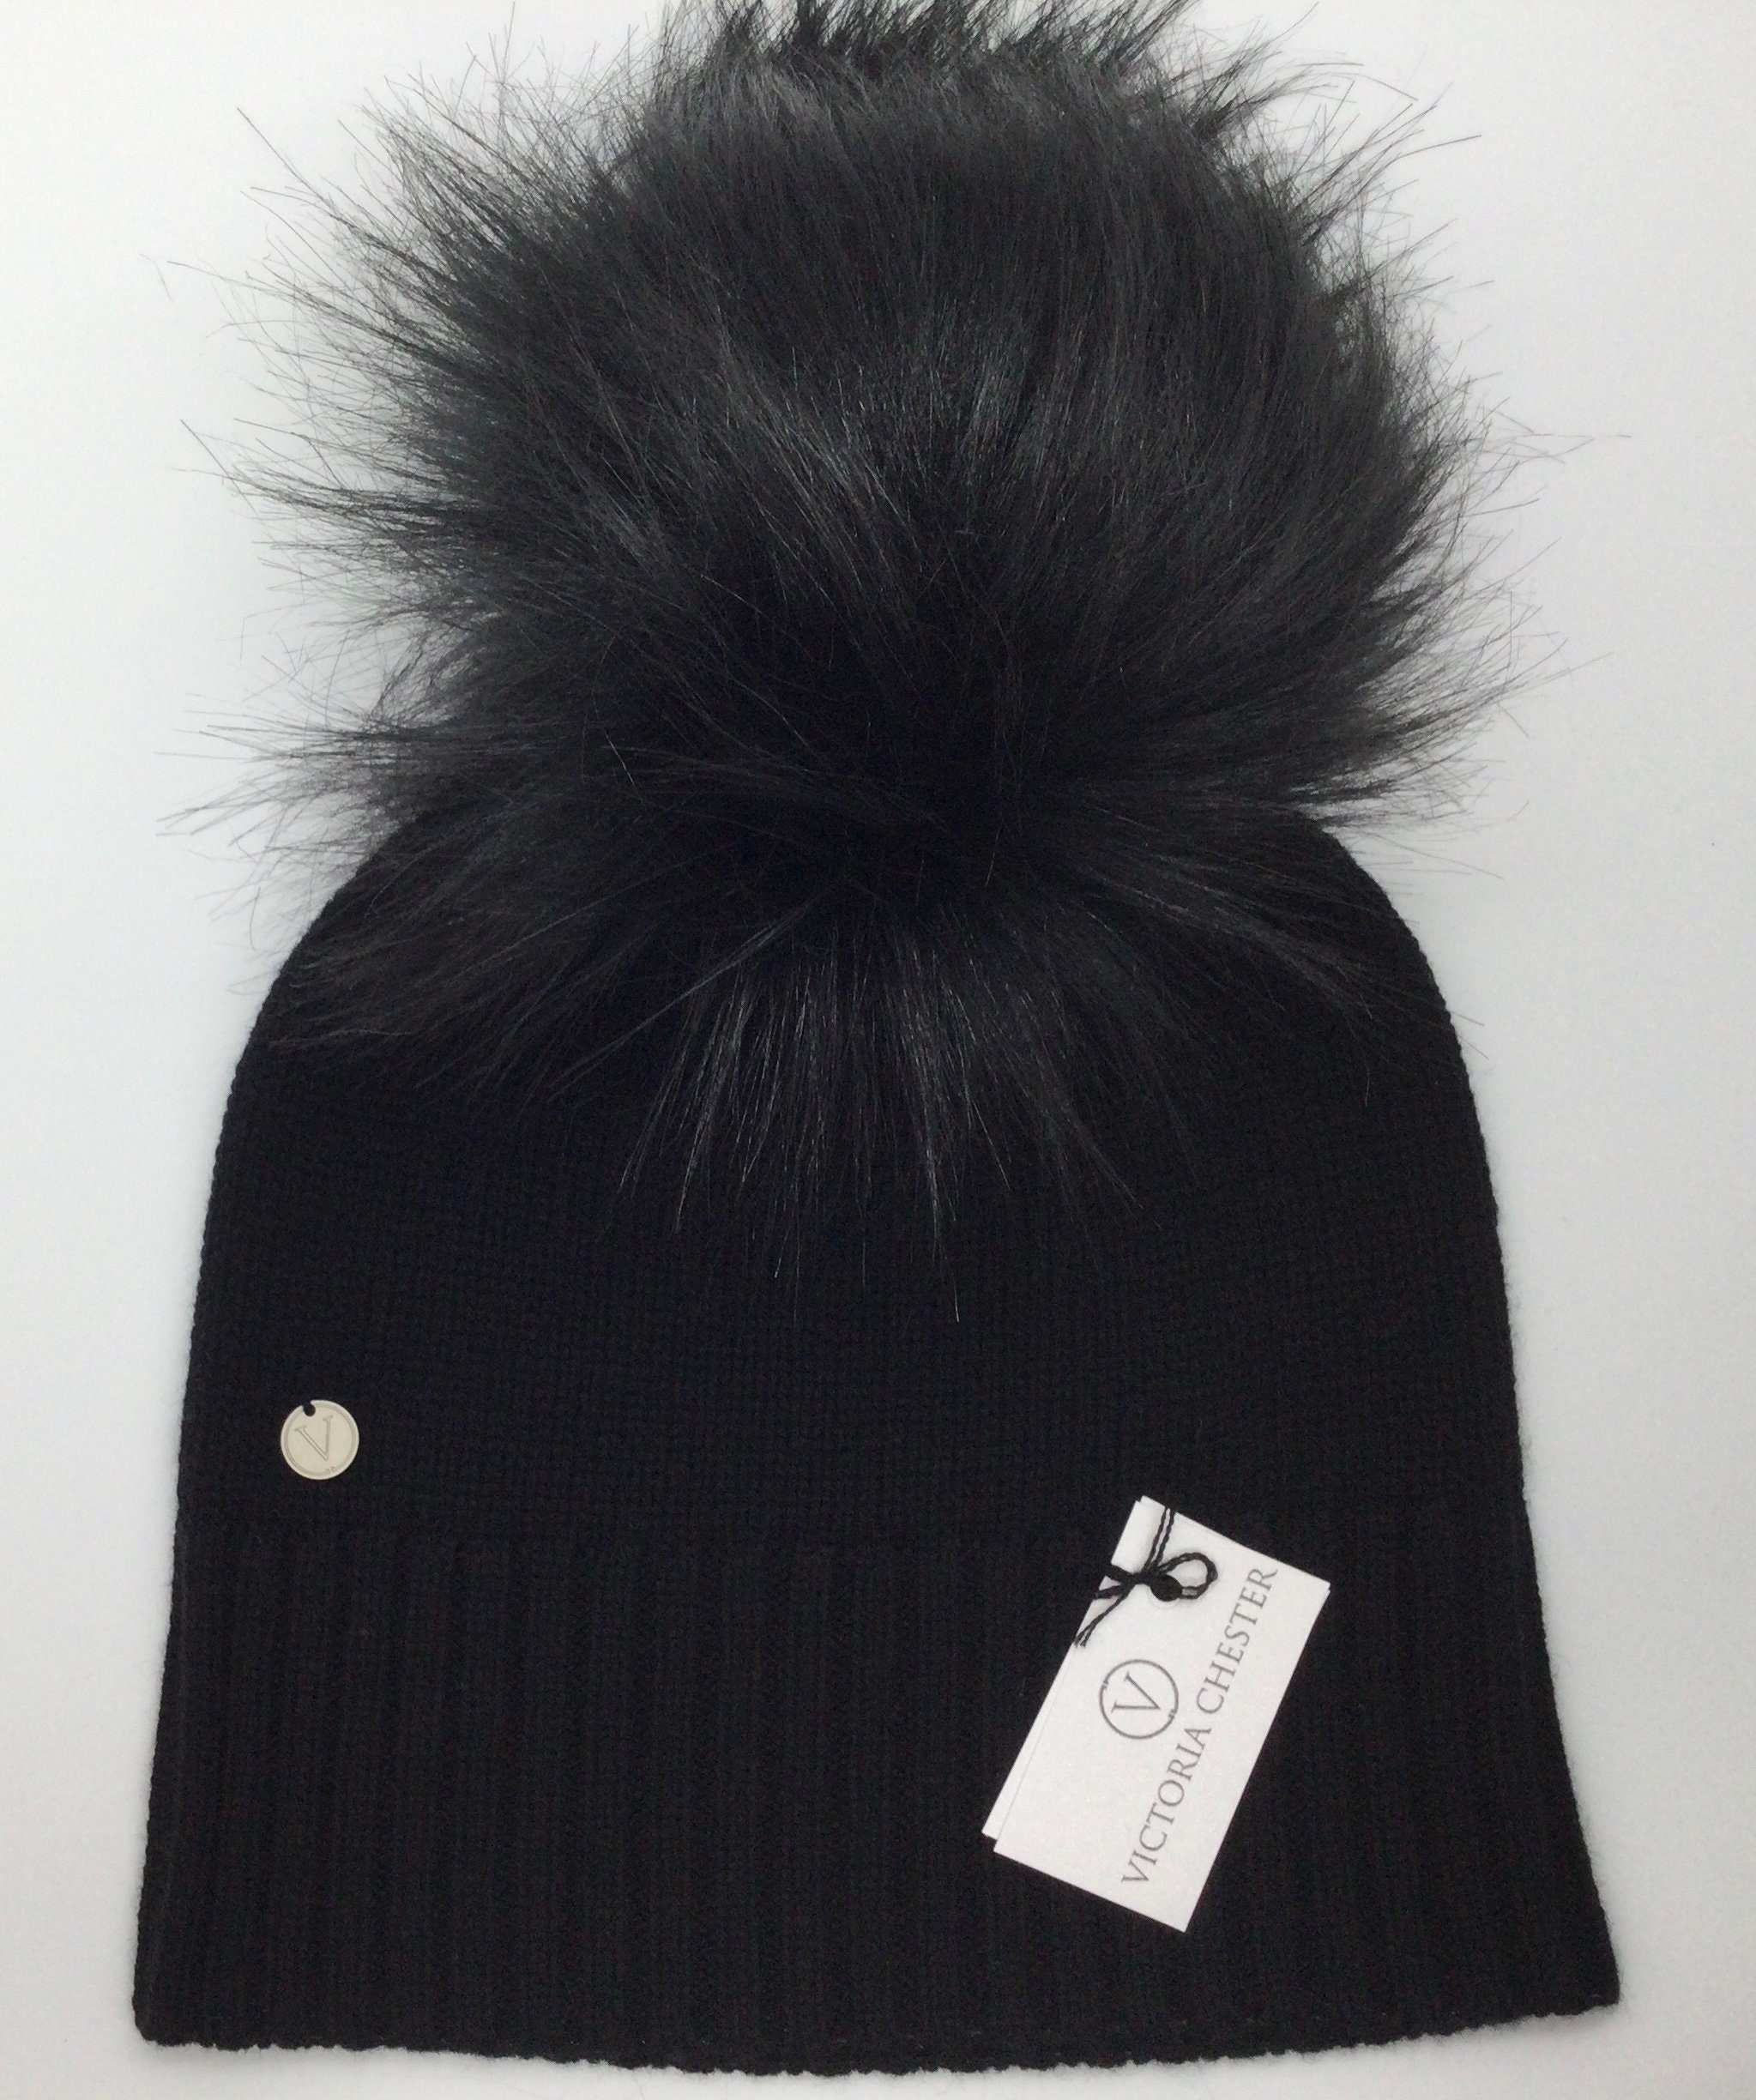 Ladies Pom Pom hat, lightweight cashmere part ribbed detail by Willow Luxury ( one size)